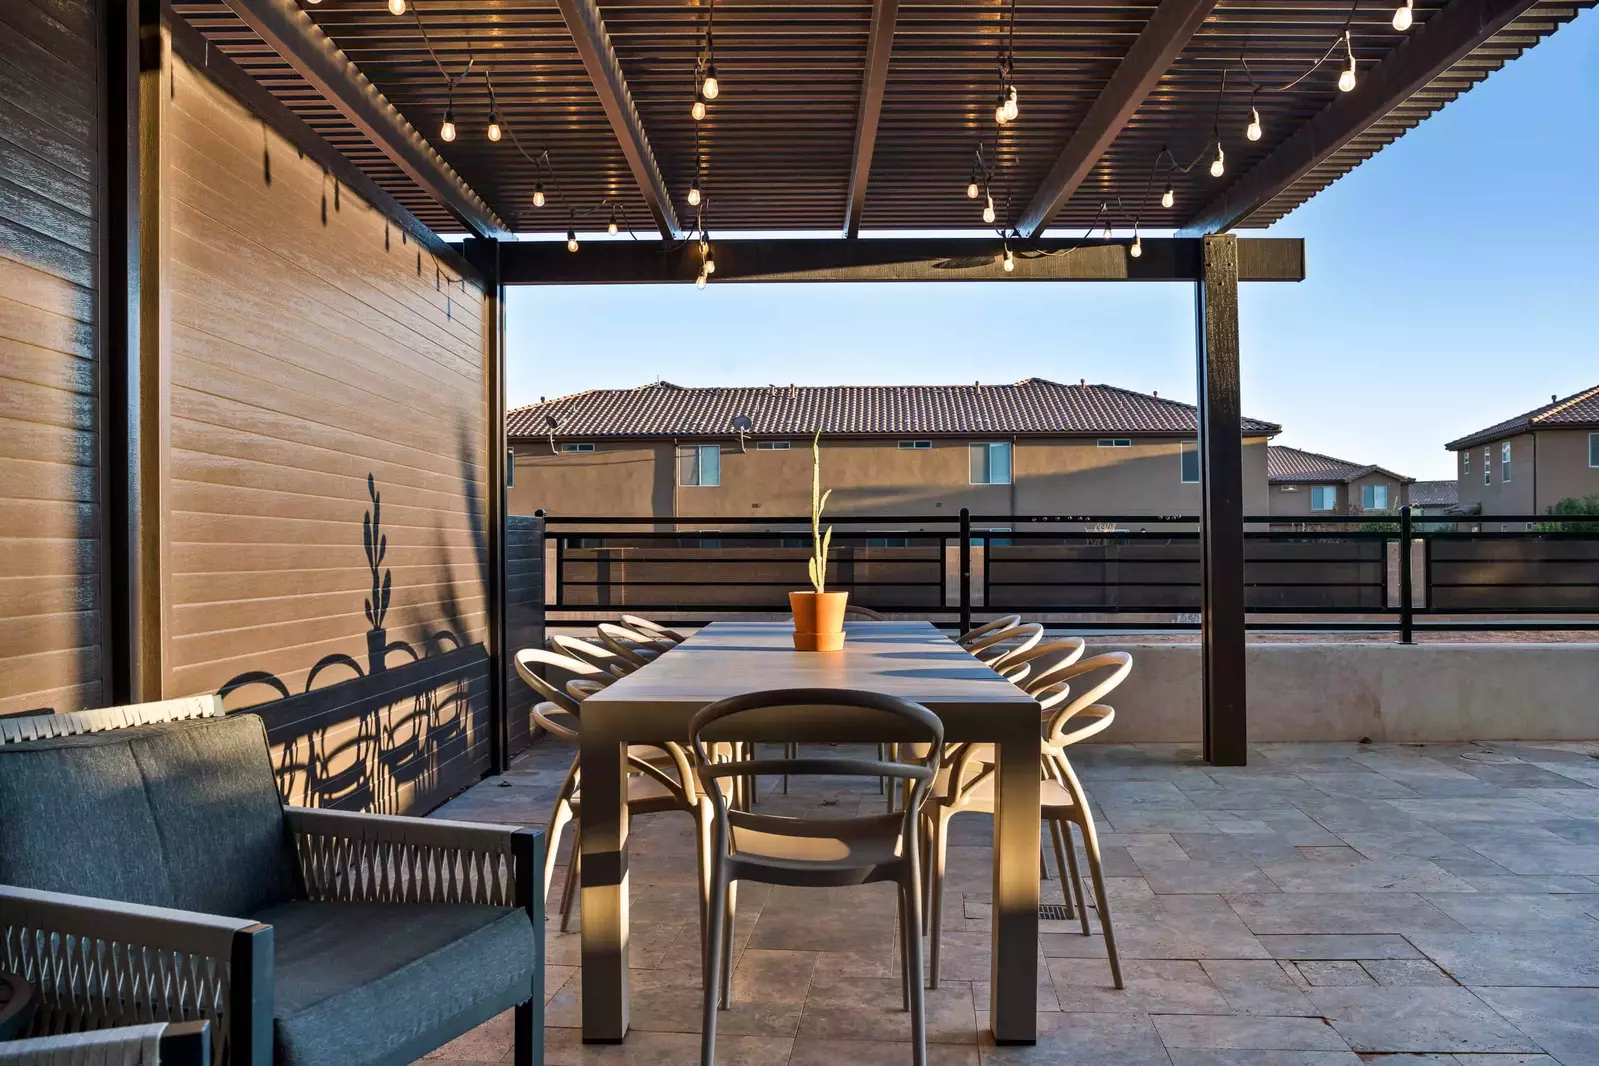 Back Yard Dining area covered with a Pergola and lighting